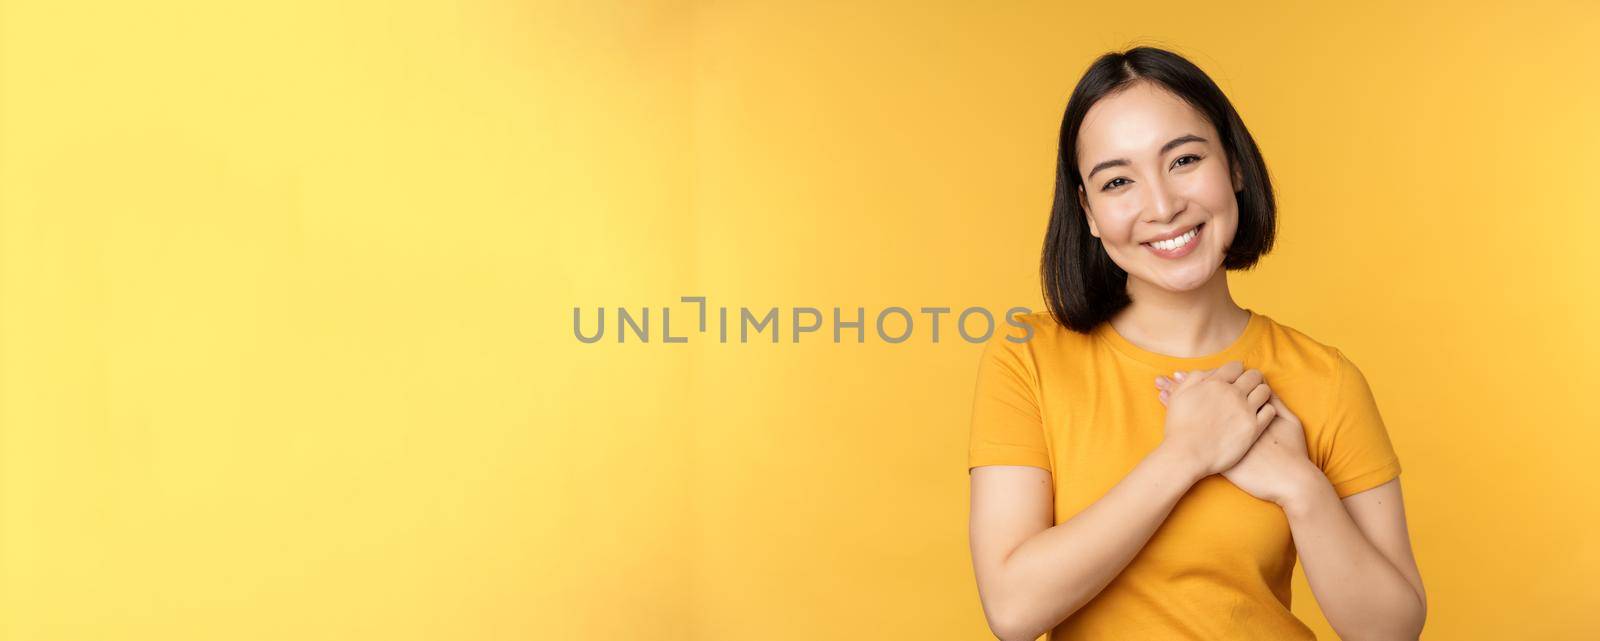 Romantic korean girl, asian woman holding hands on heart, smiling with care and tenderness, standing over yellow background.